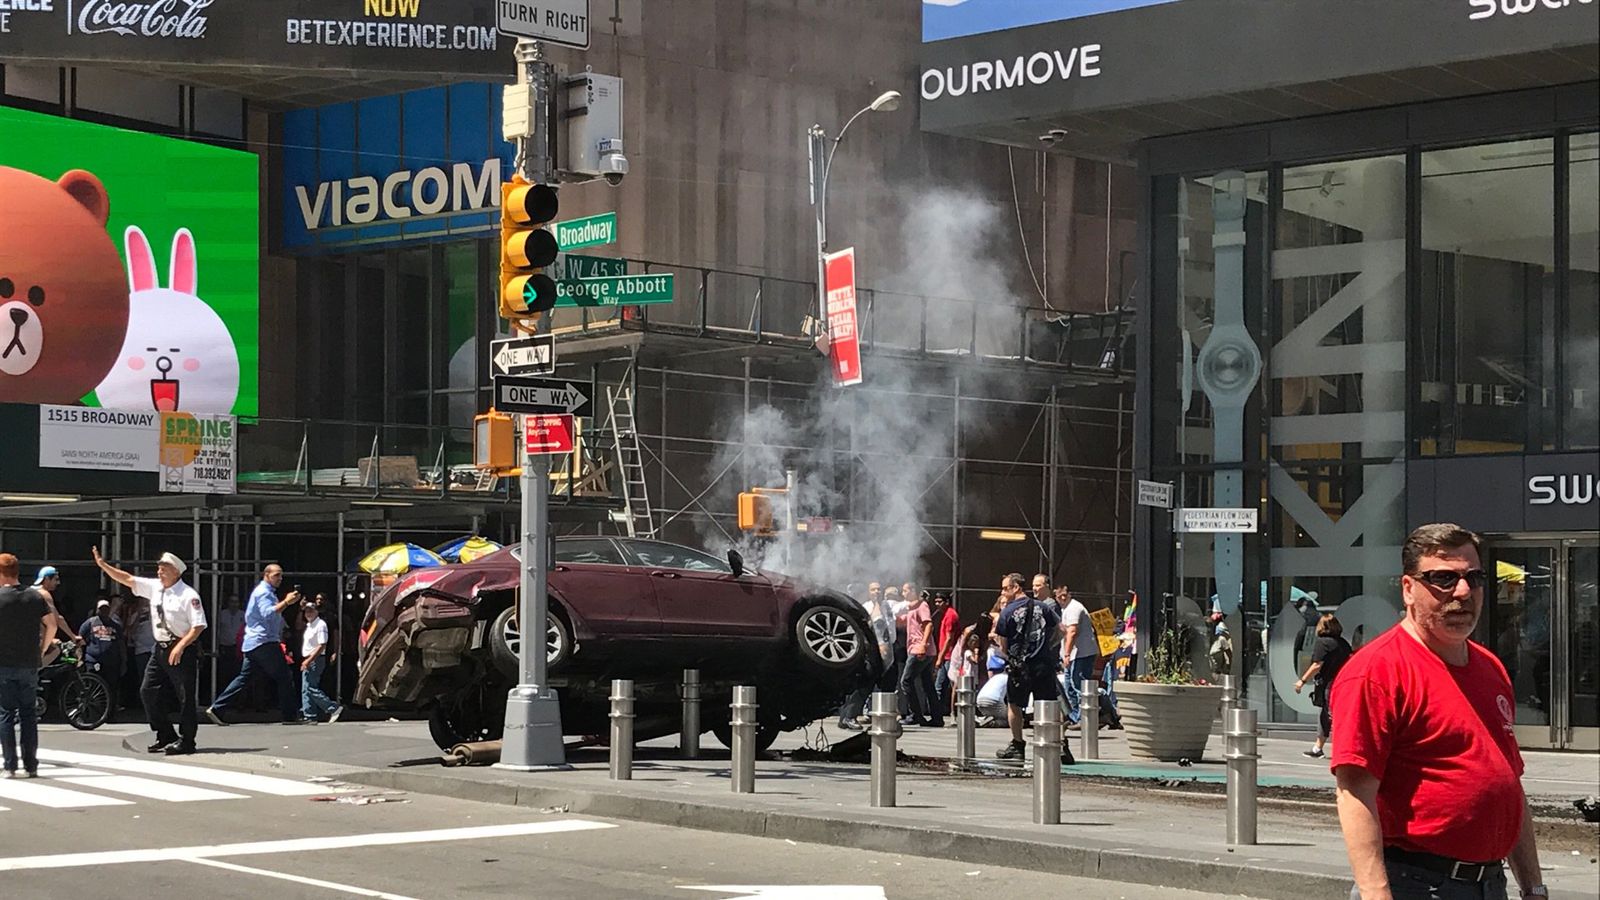 At least one dead after speeding vehicle strikes pedestrians in New York City's Times Square 8e3978825b6c93280e9858668c40e564b0ccdca935200d2678be263a053a4efc_3956943